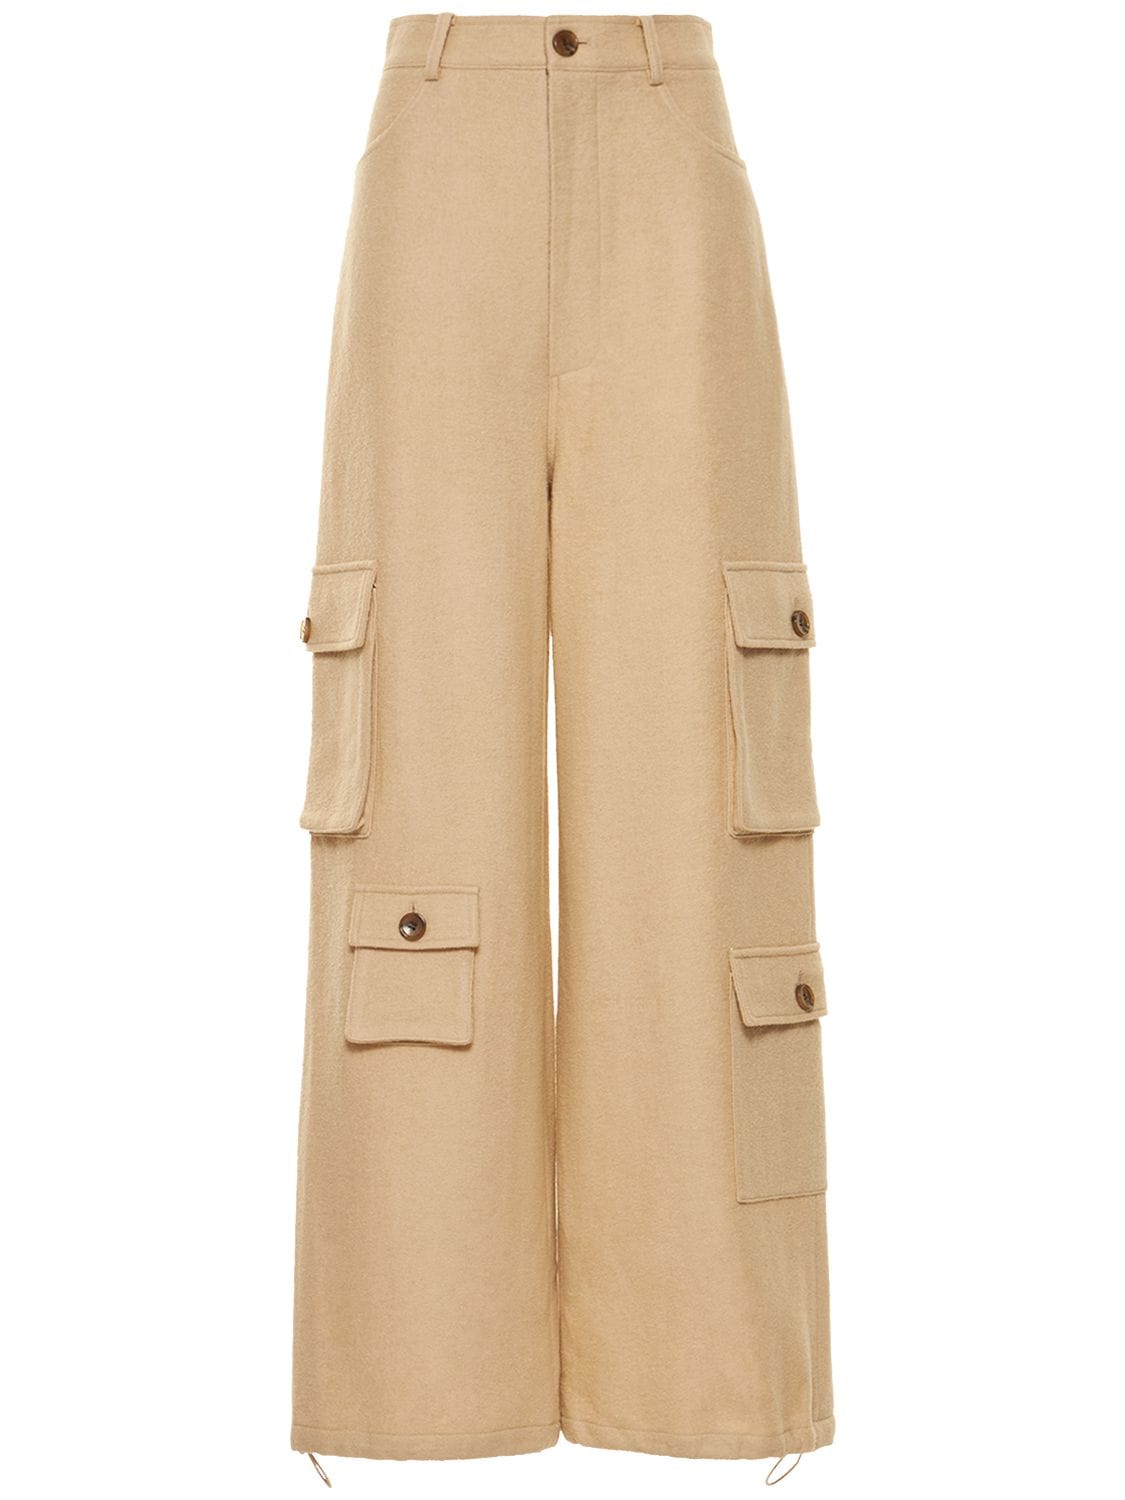 THE FRANKIE SHOP HAILEY BOILED WOOL CARGO PANTS